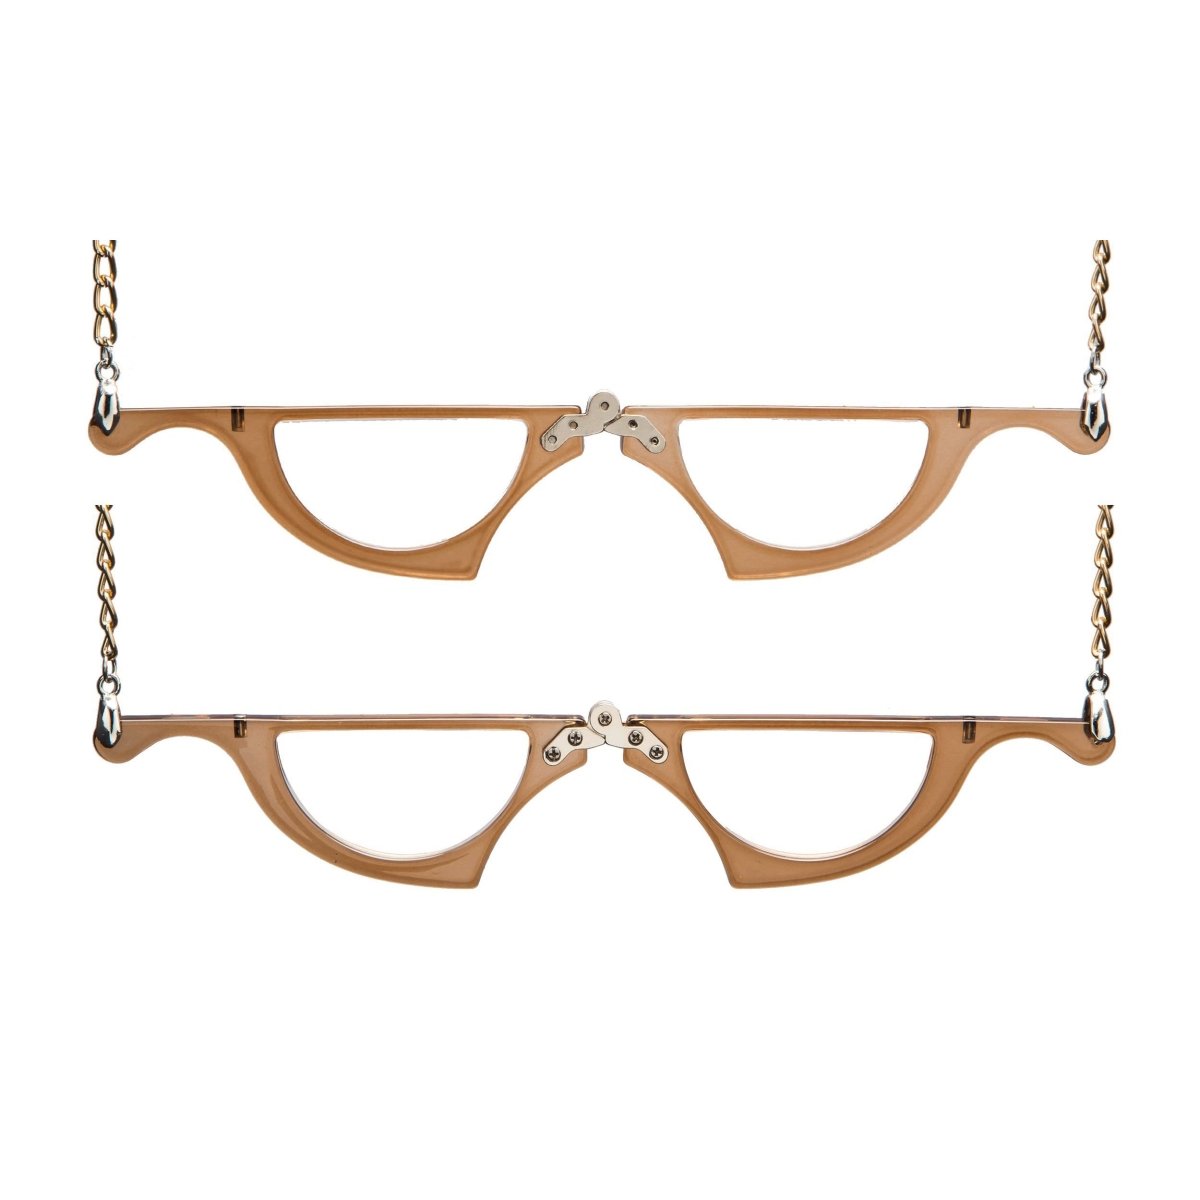 Stylsih Folding Reading Glasses with Chain for Women R153eyekeeper.com